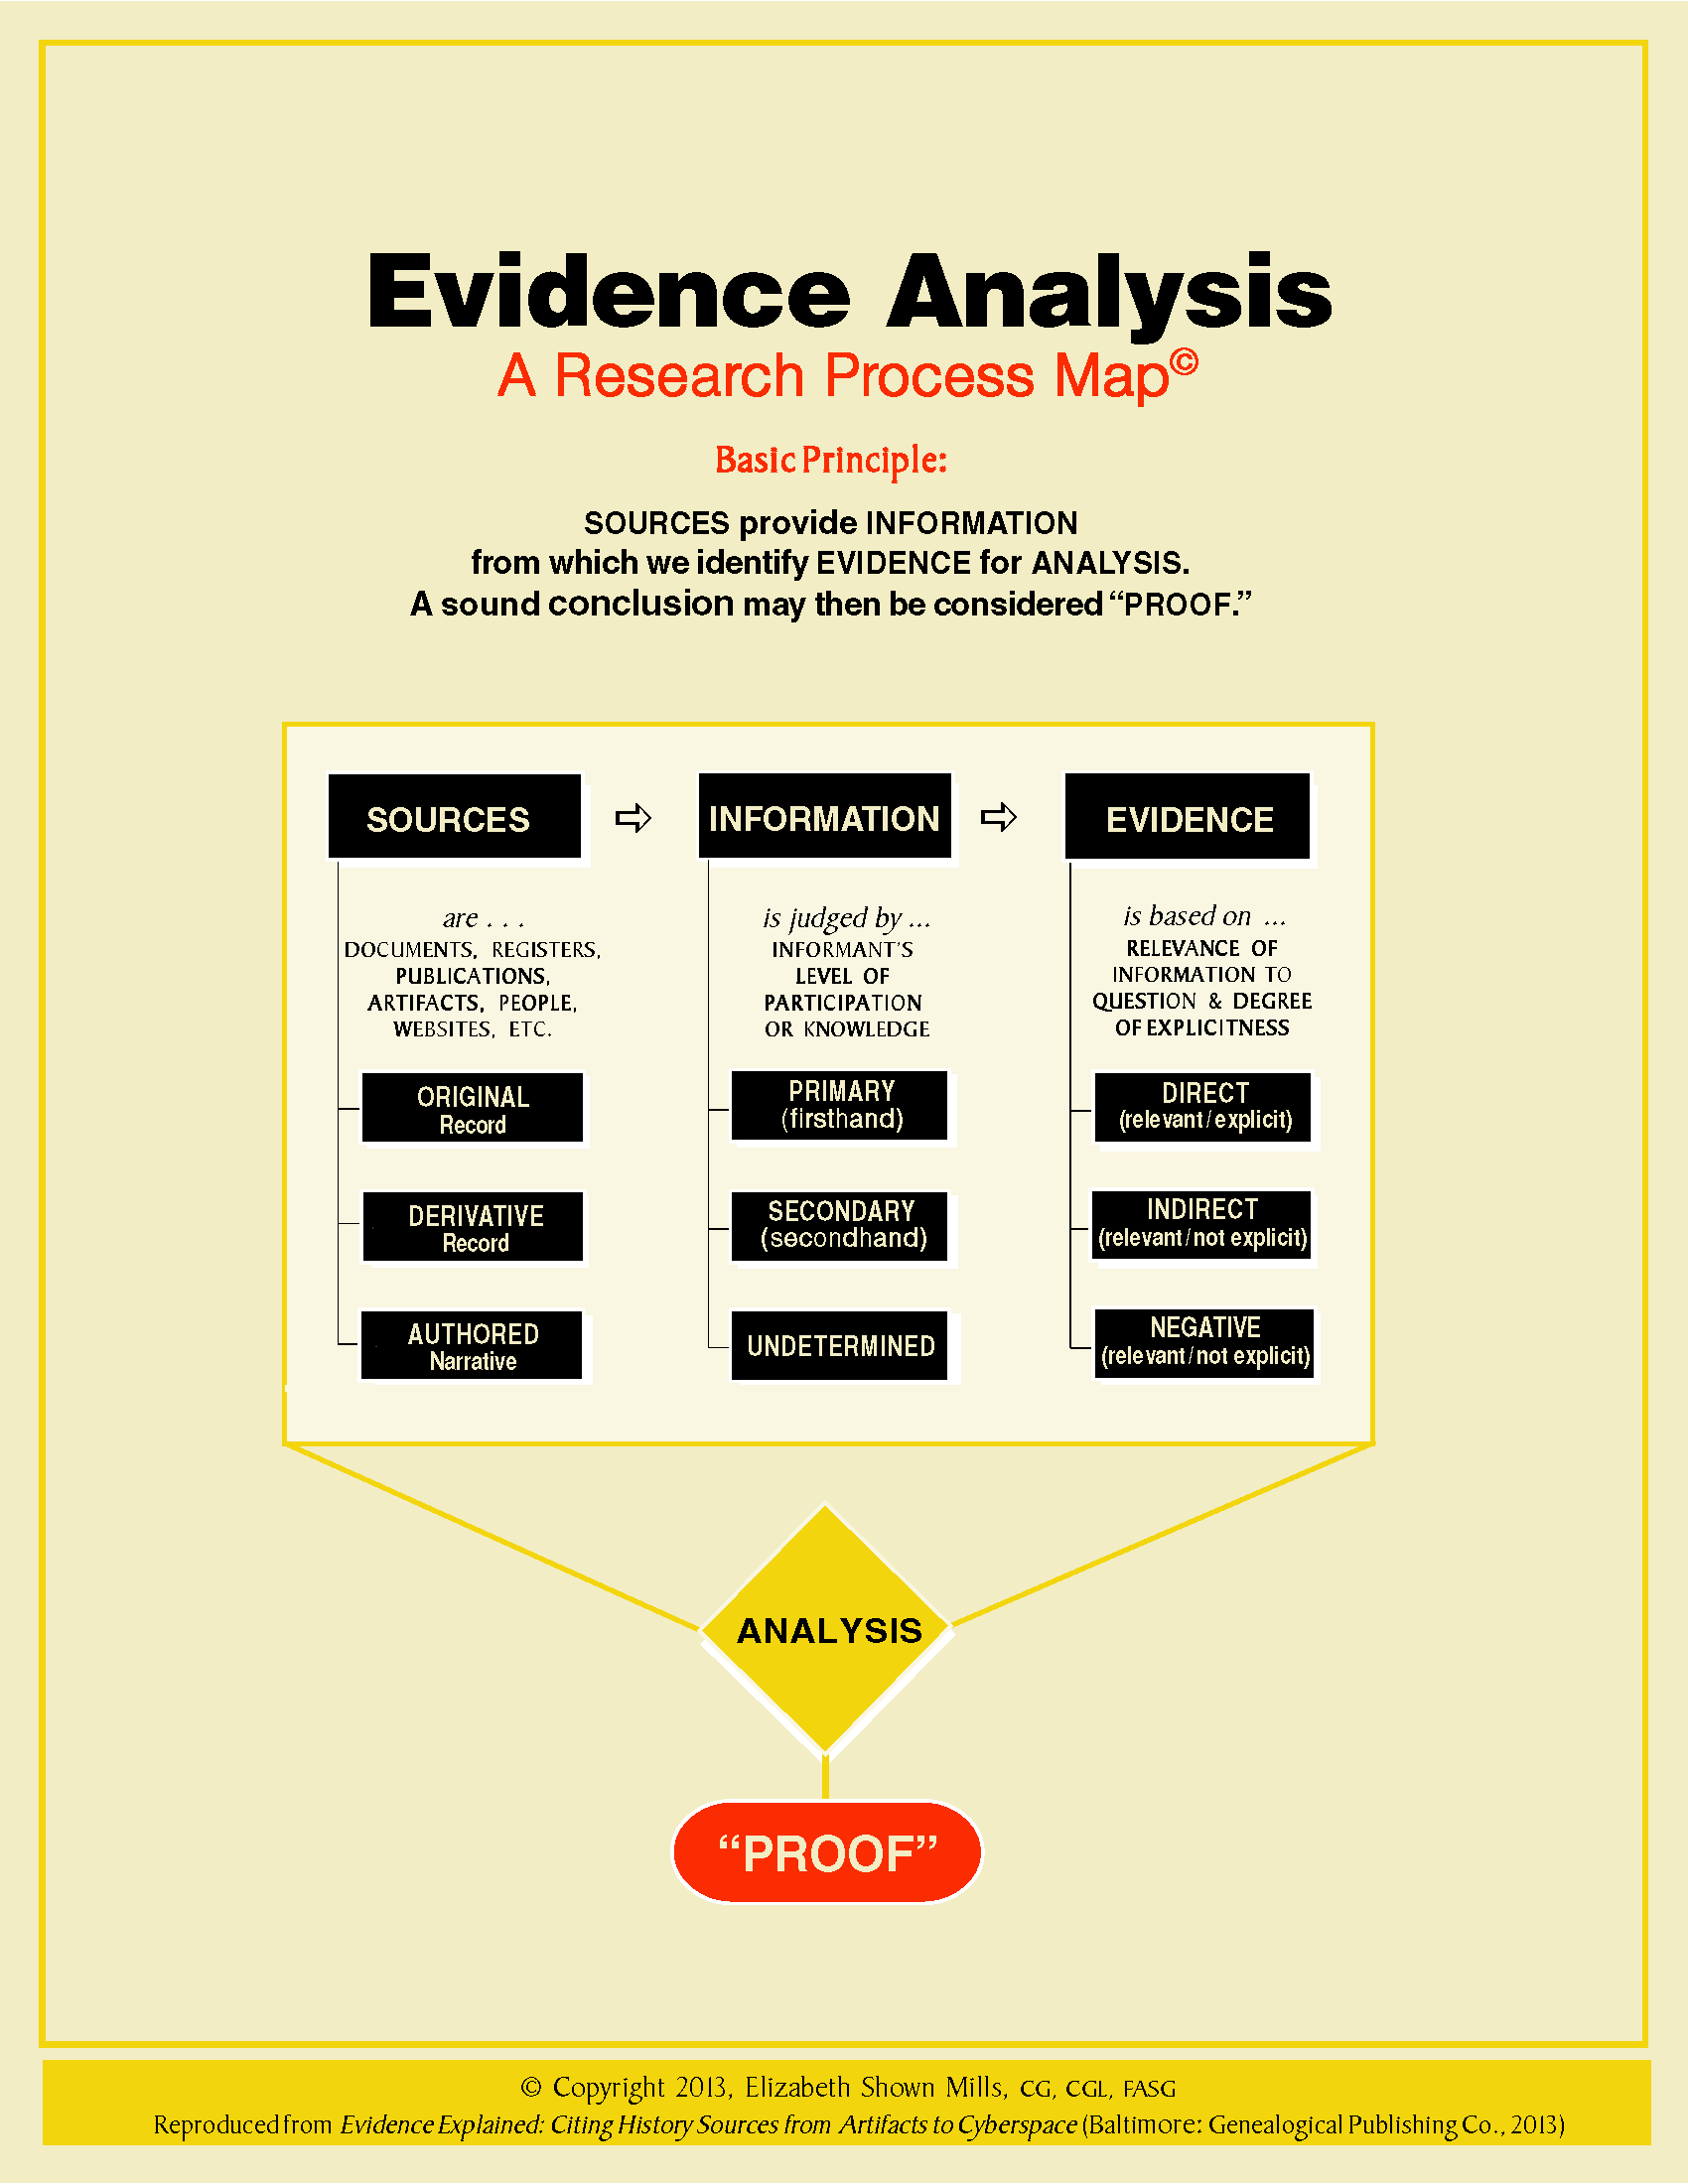 how to analyze evidence in a research paper